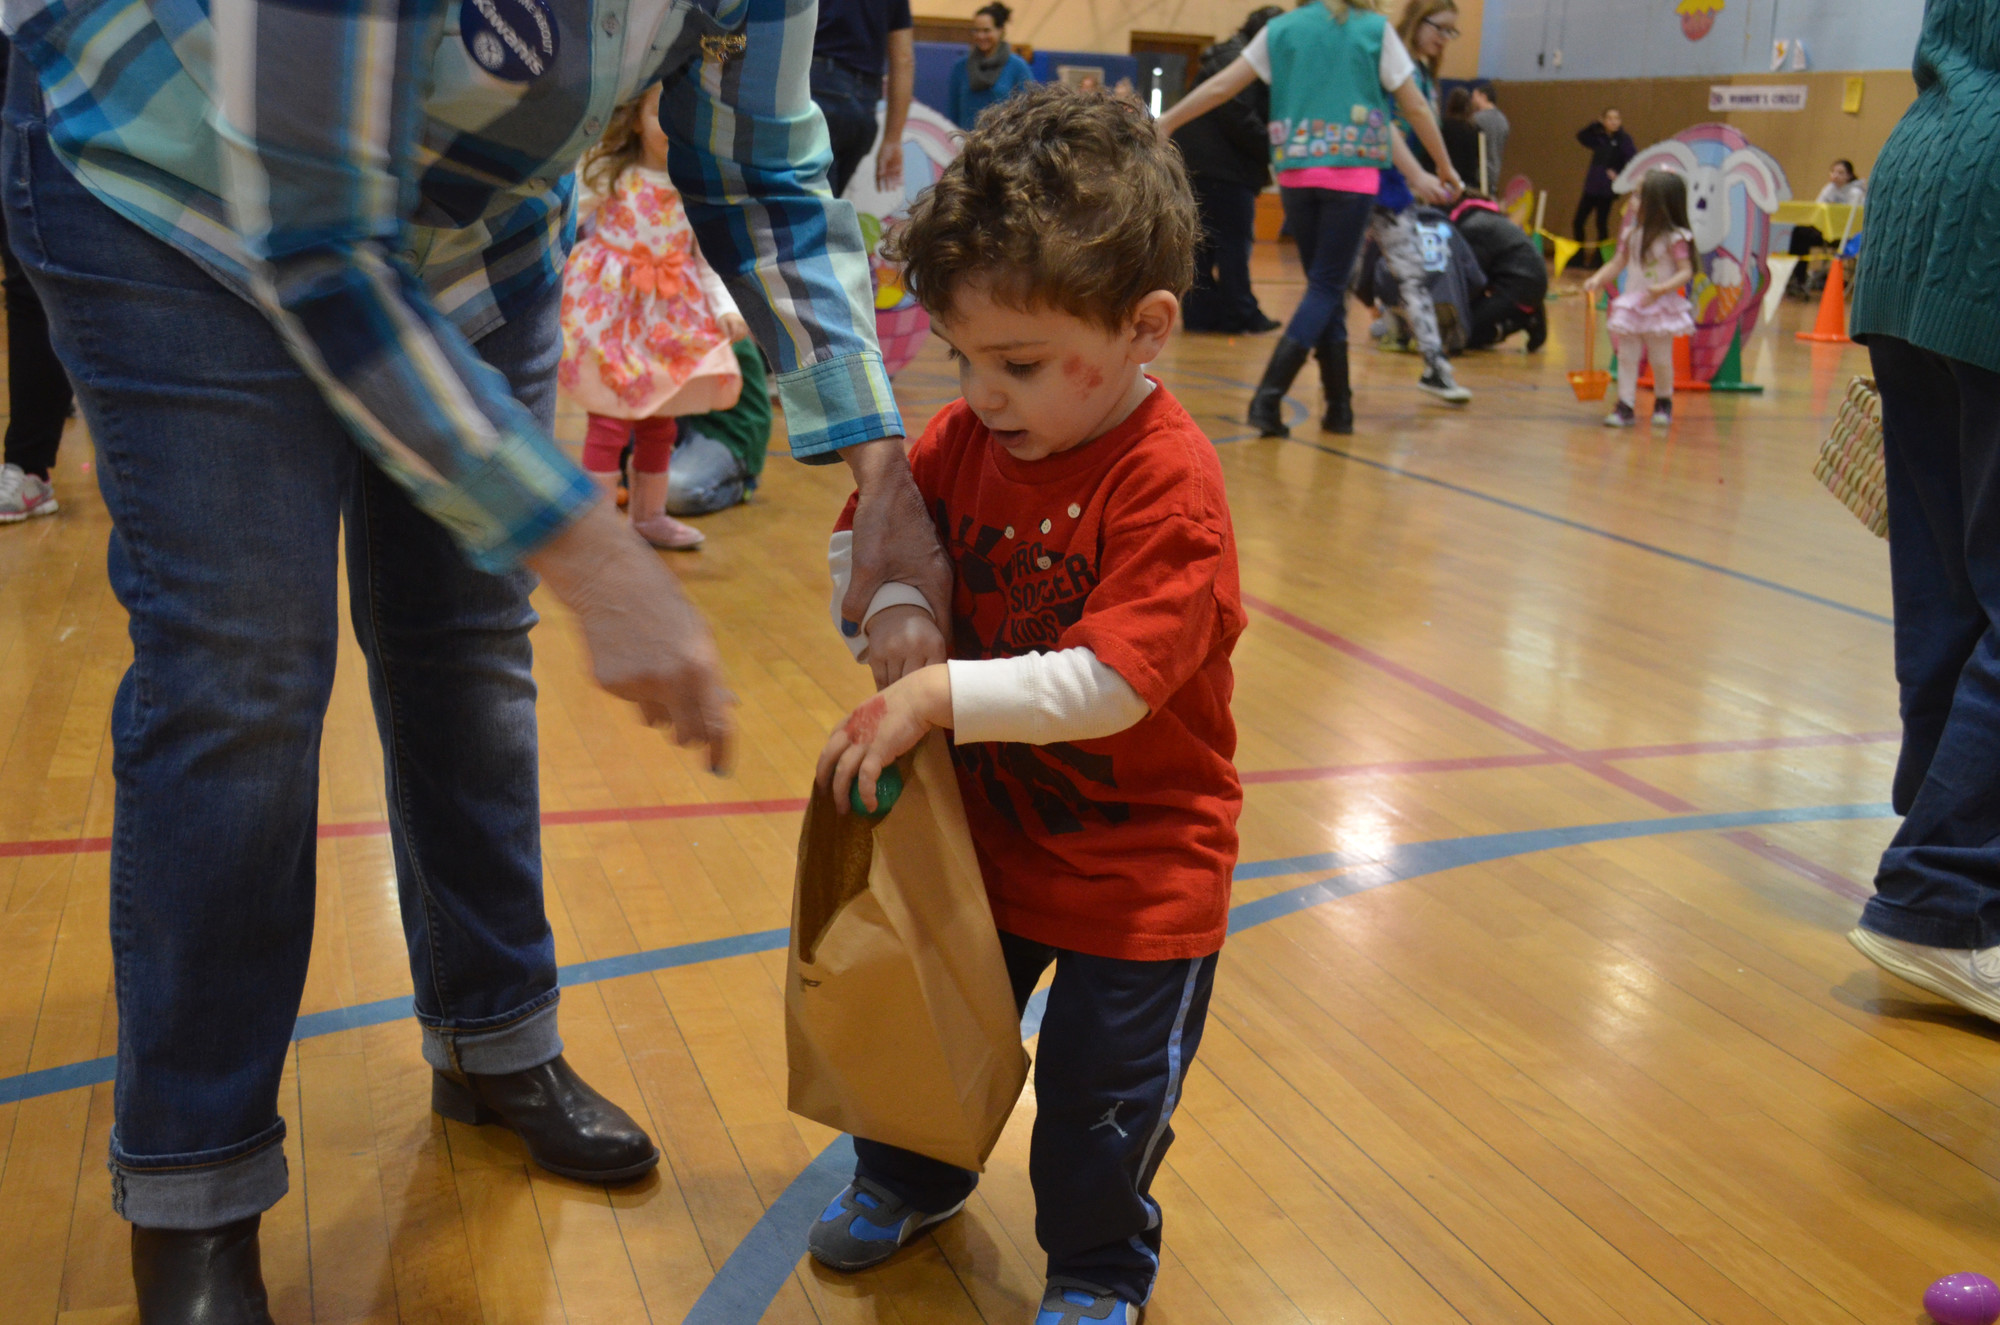 Marco Stornello, 2 and a half, picked up some Easter eggs.